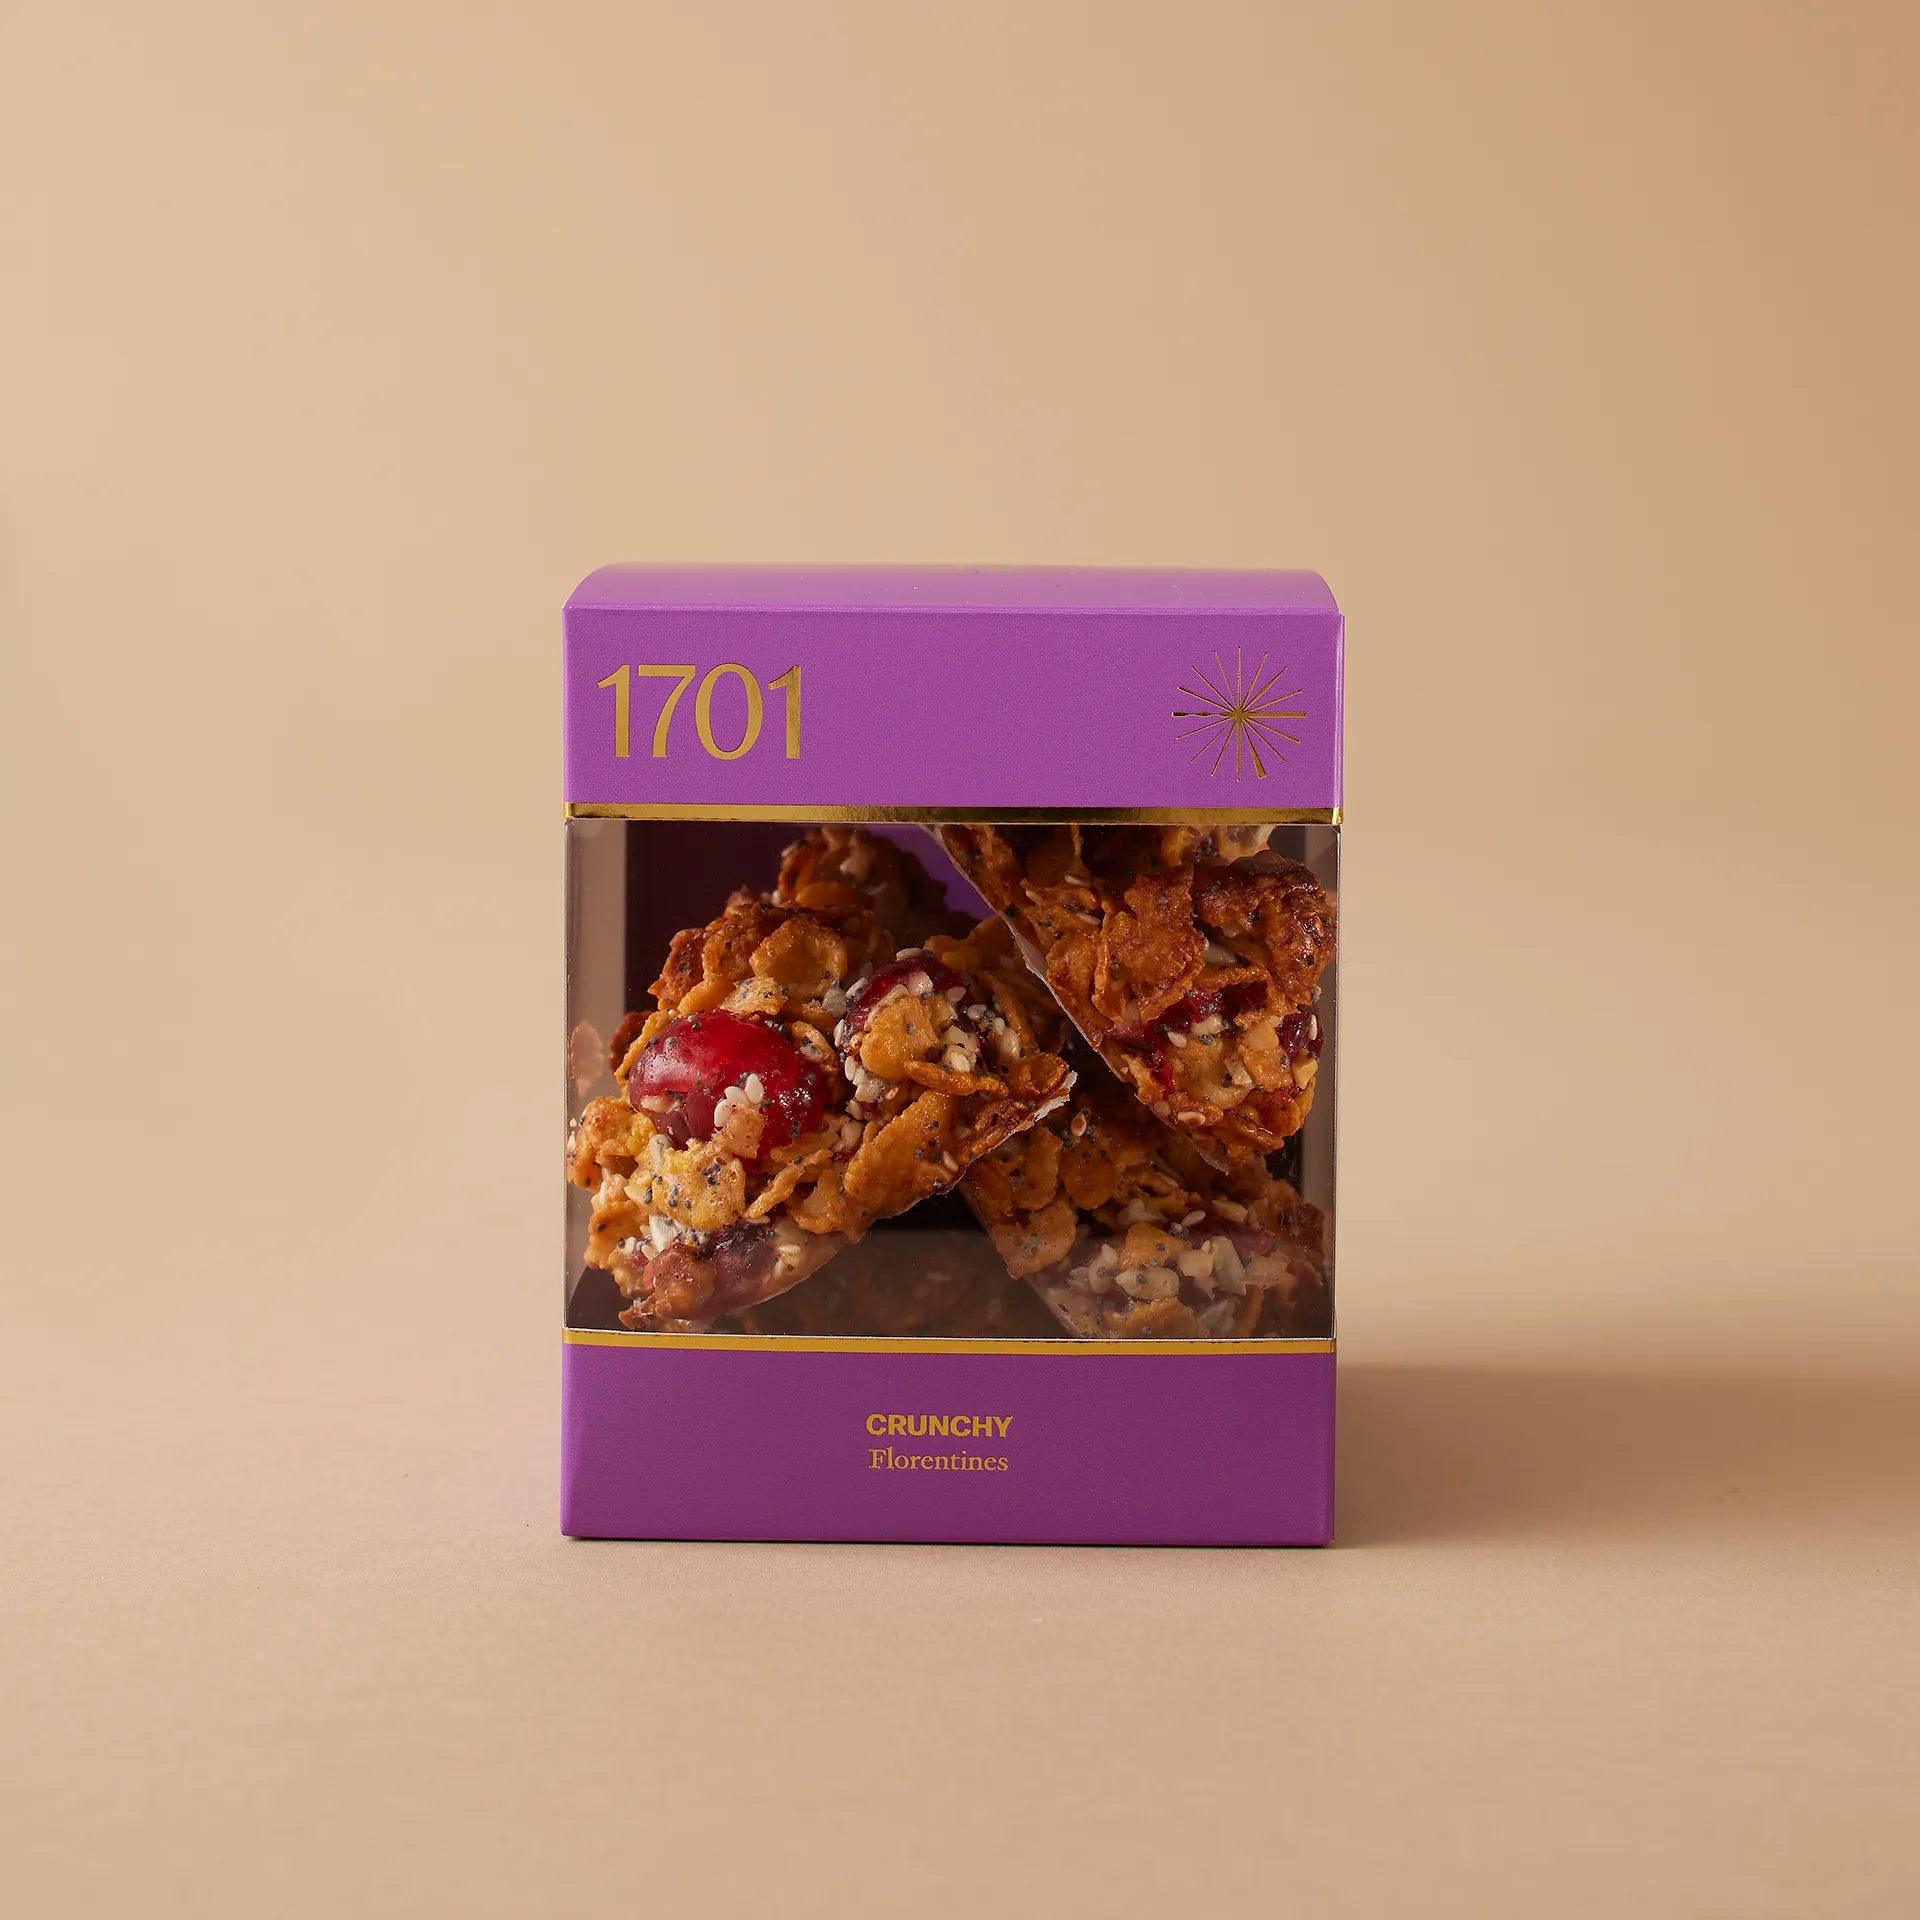 The Crunchy Florentines Box (200g) is presented on a warm background. The boxfeatures a purple and gold design. It contains 200g of handmade biscuits that are SANHA Halaal approved, including crunchy florentine bicuits. This box of delicious biscuits is the perfect thoughtful gift for someone close to you or a great opportunity to spoil yourself and your family.